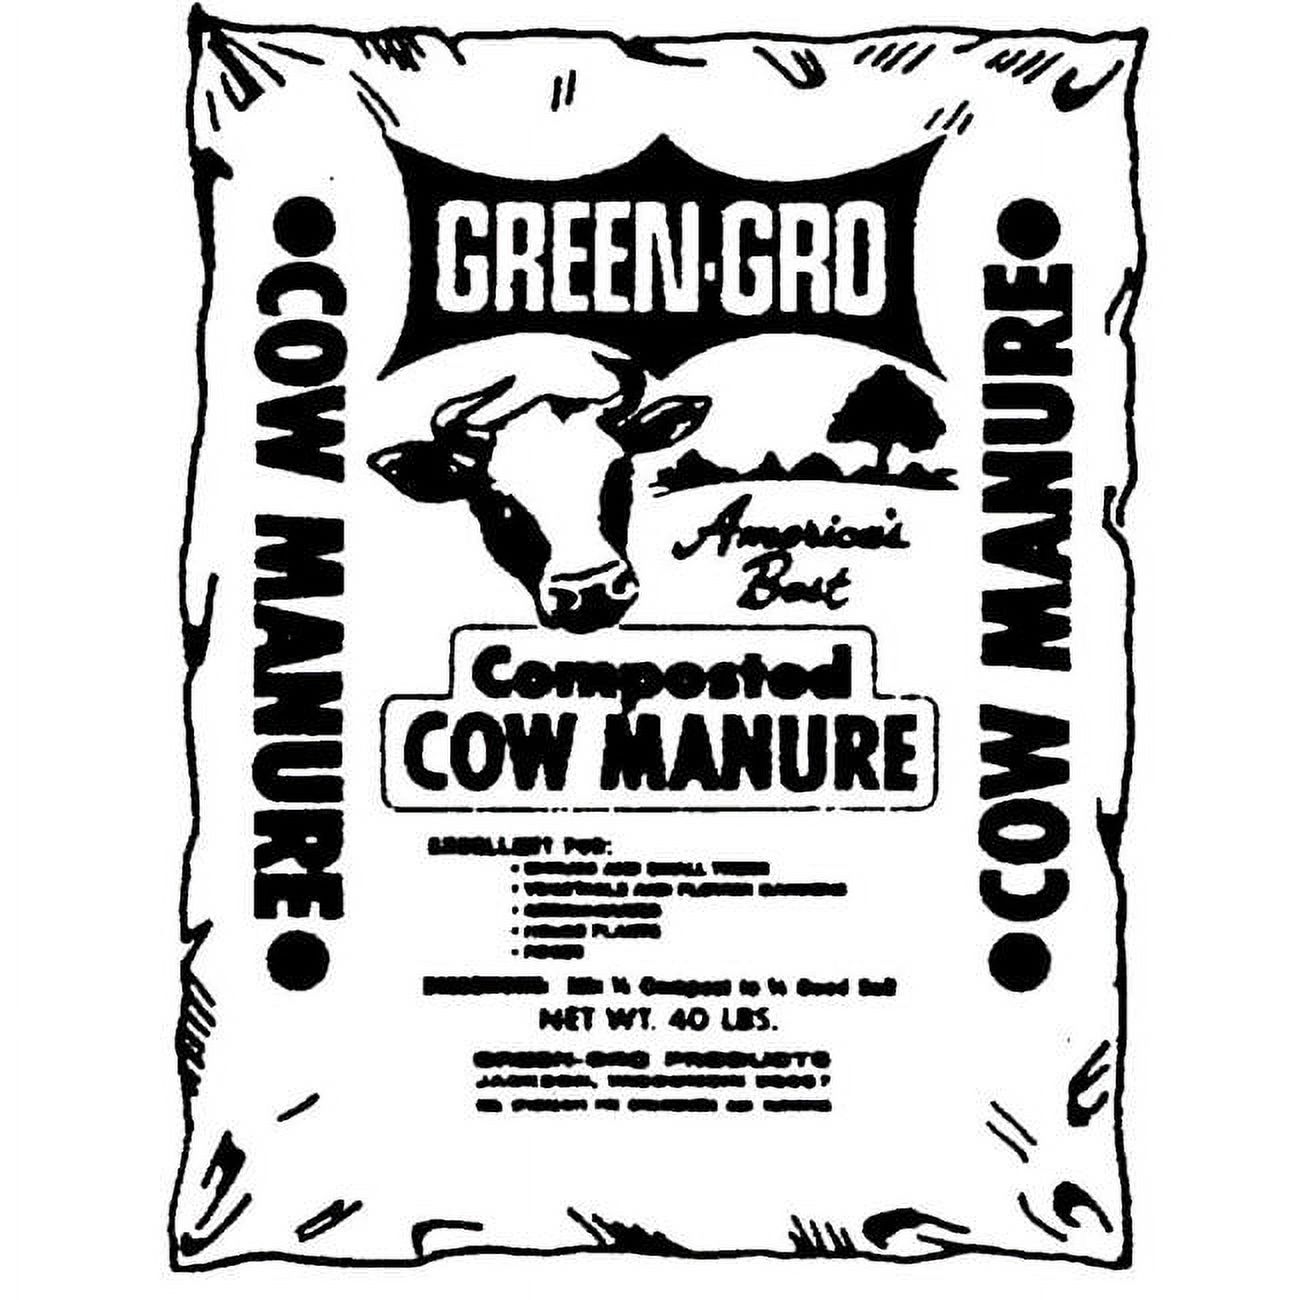 Liesener 002685 0.75 cu. ft. Green Gro Composted Cow Manure - image 1 of 1